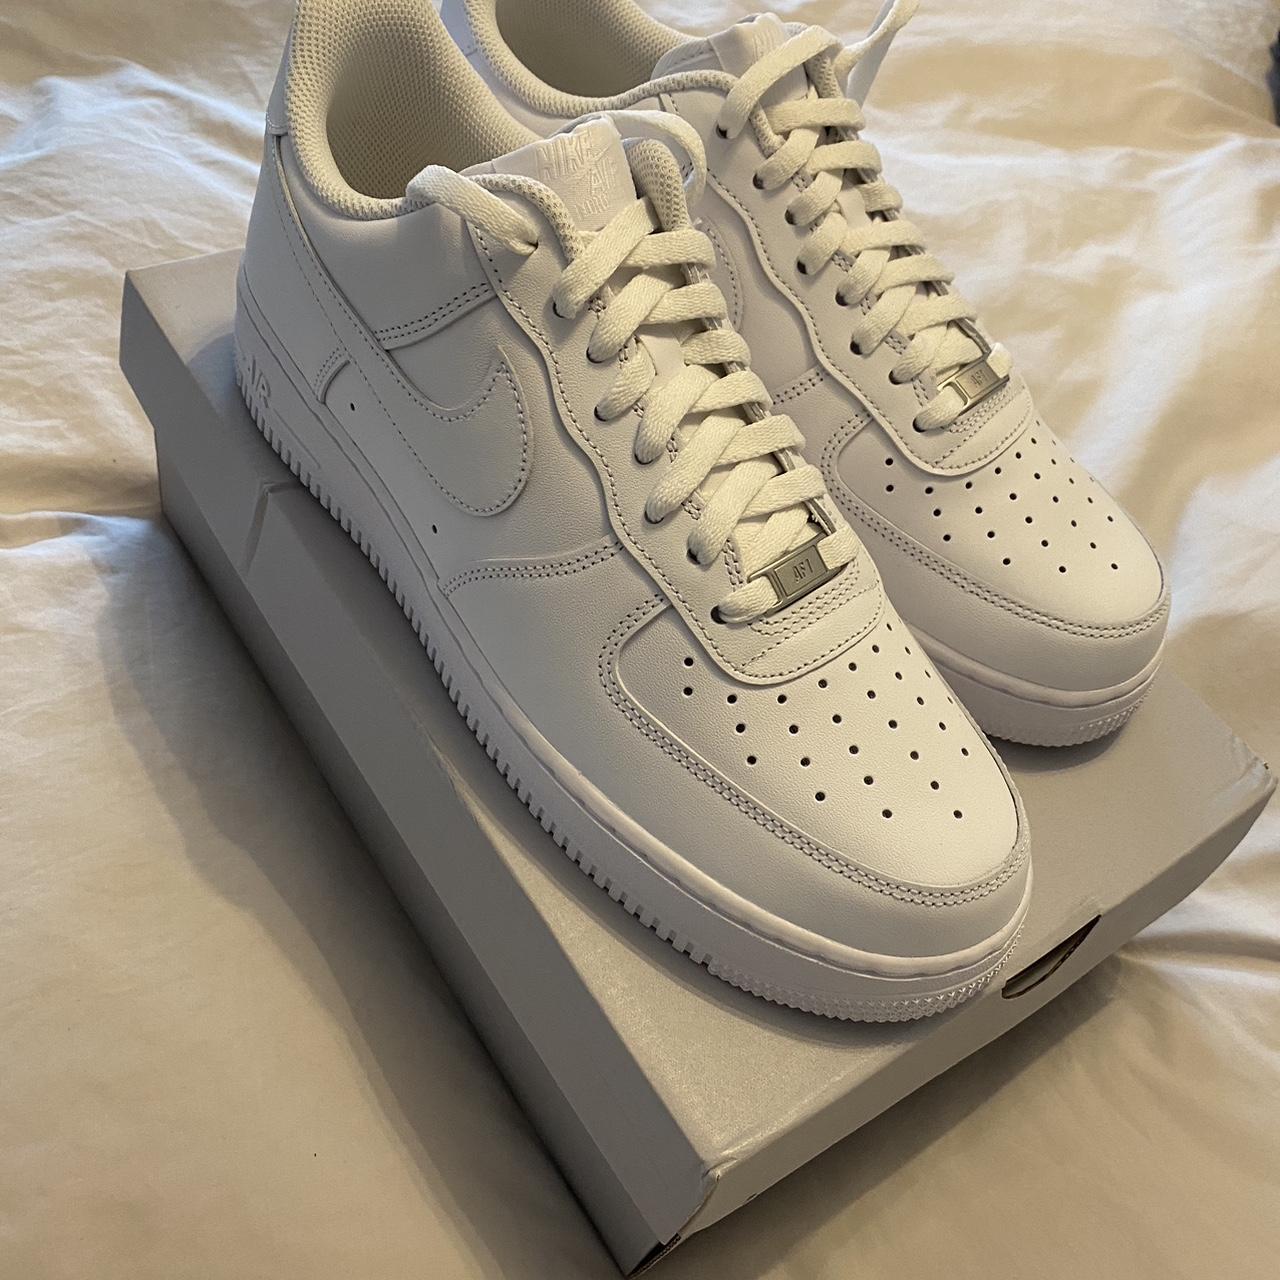 White AF1s new with box & tags, size UK 9. - Depop